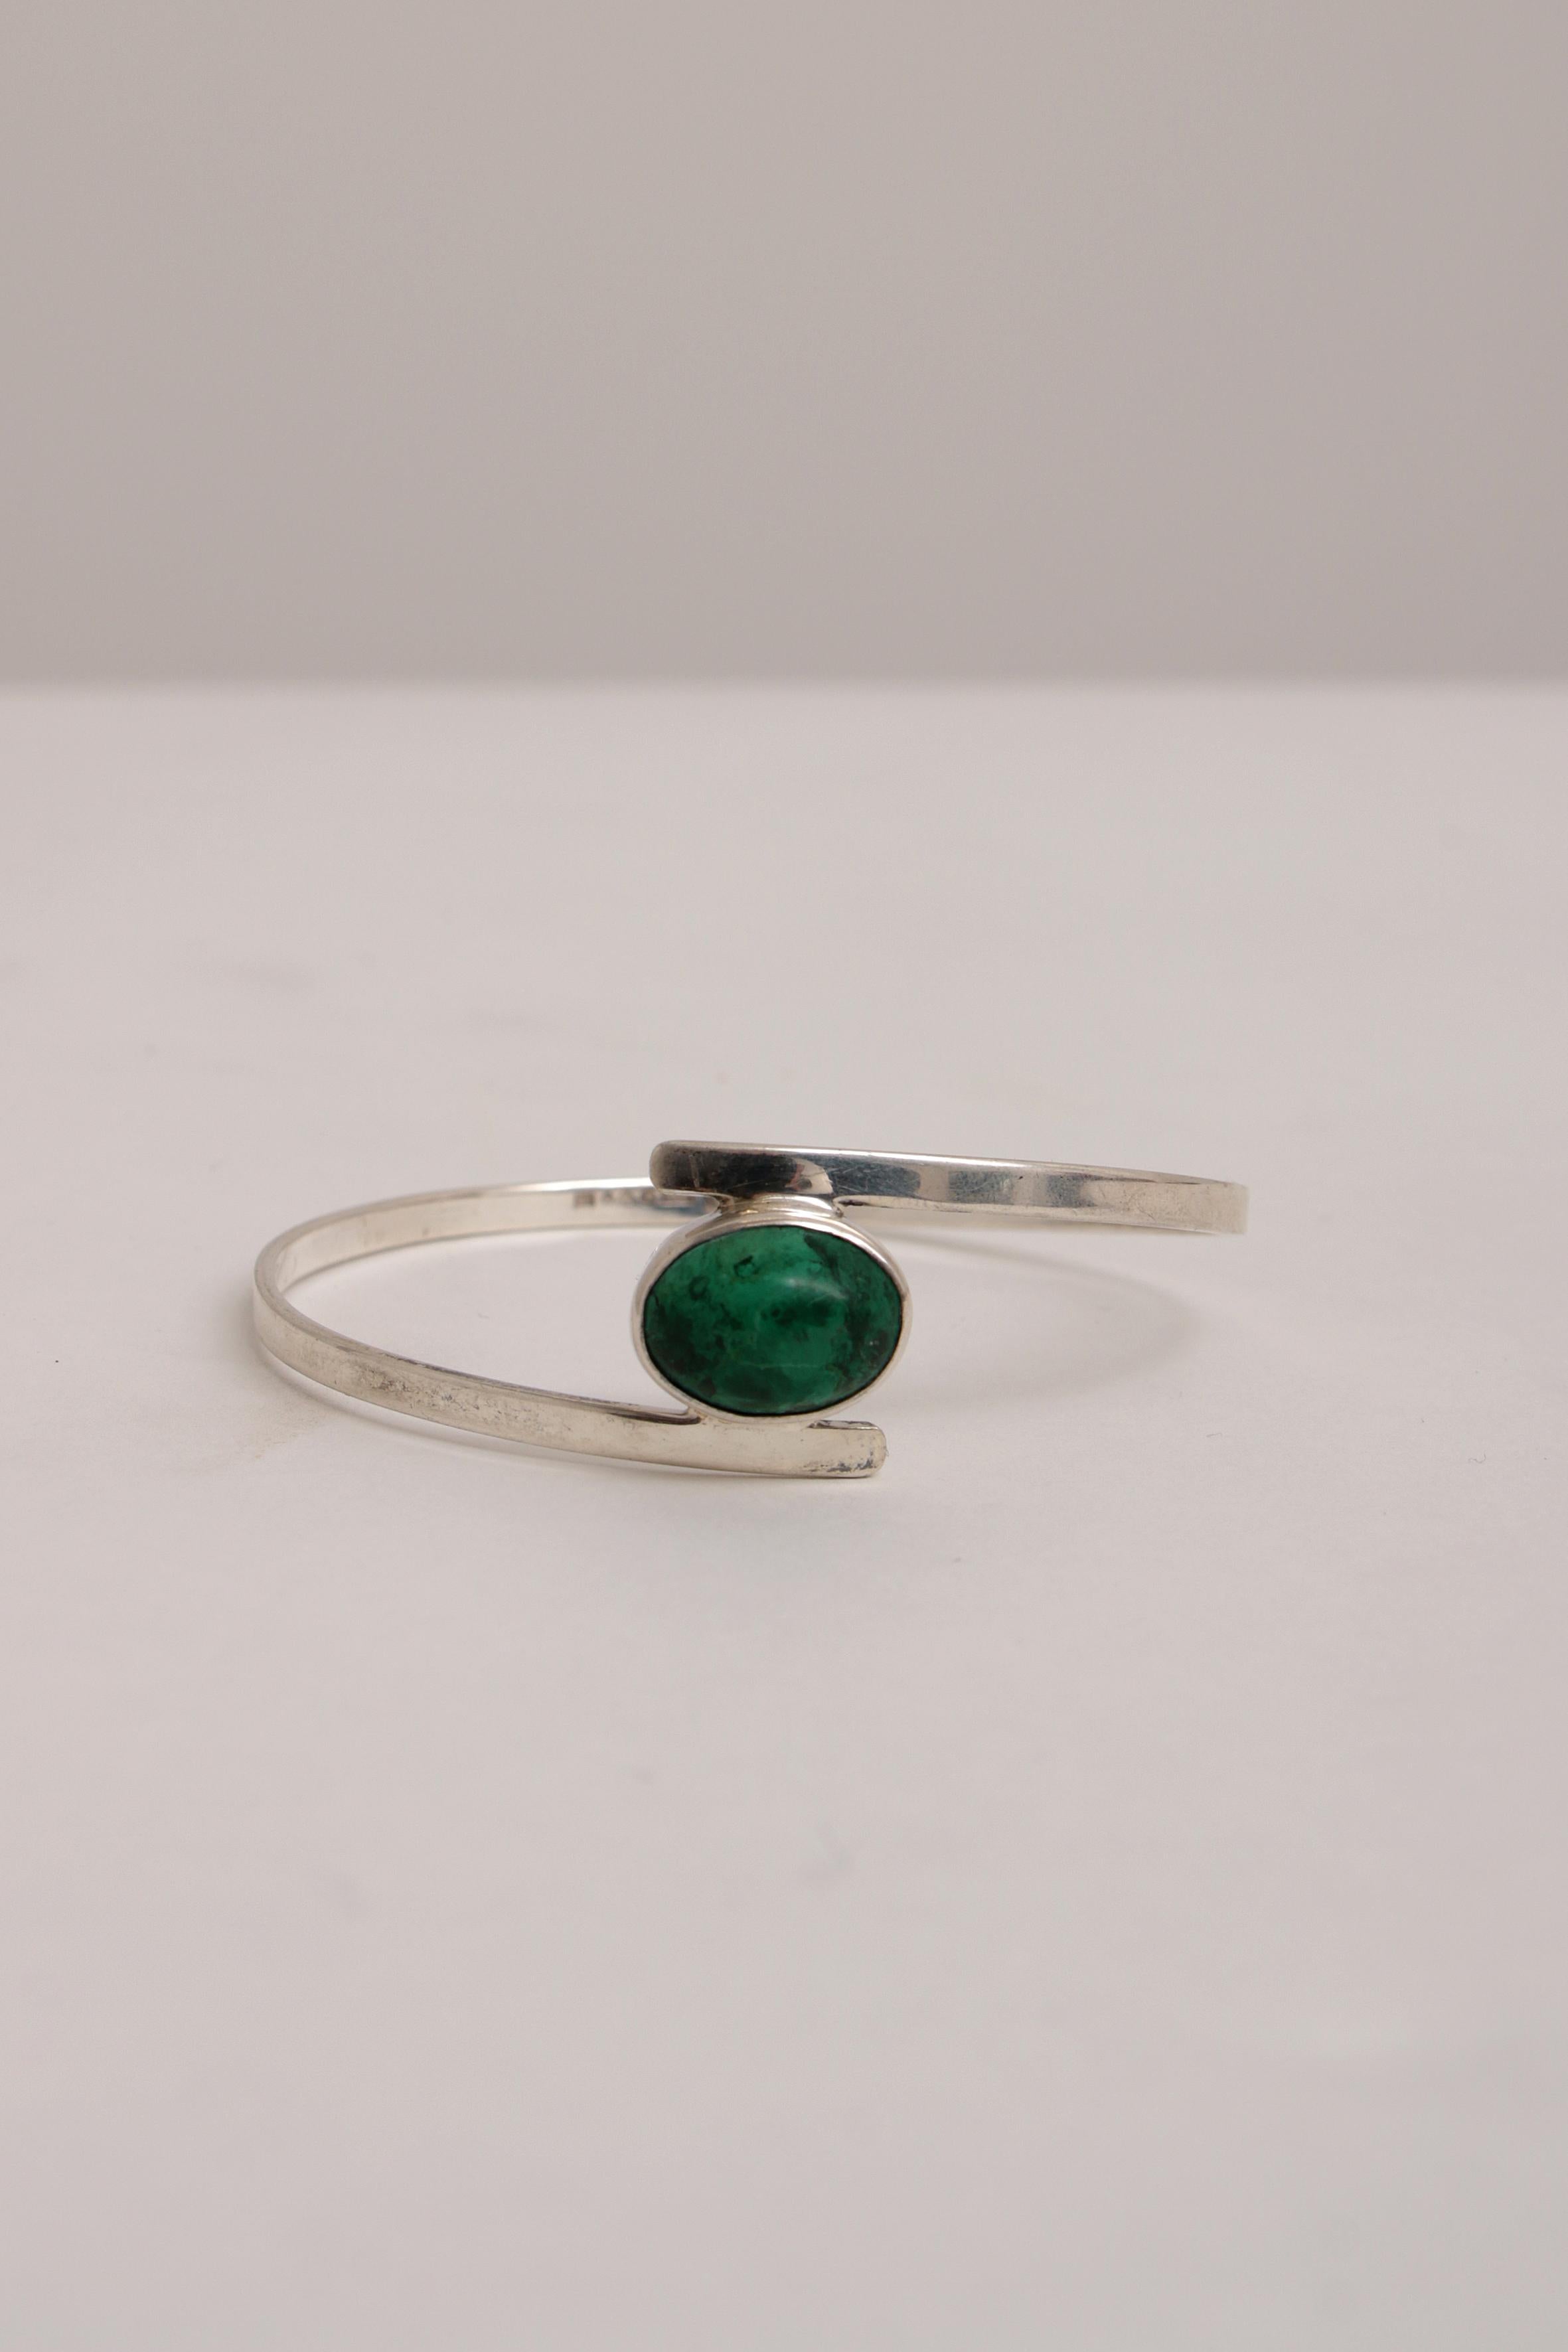 Scandinavian Modern Sterling Silver bracelet by Isaac Cohen with green stone.

Beautiful slim bracelet with beautiful green stone.

The bracelet is also signed, see the photo.

Isaac Cohen lives in Sweden, Stockholm, this bracelet has a year letter